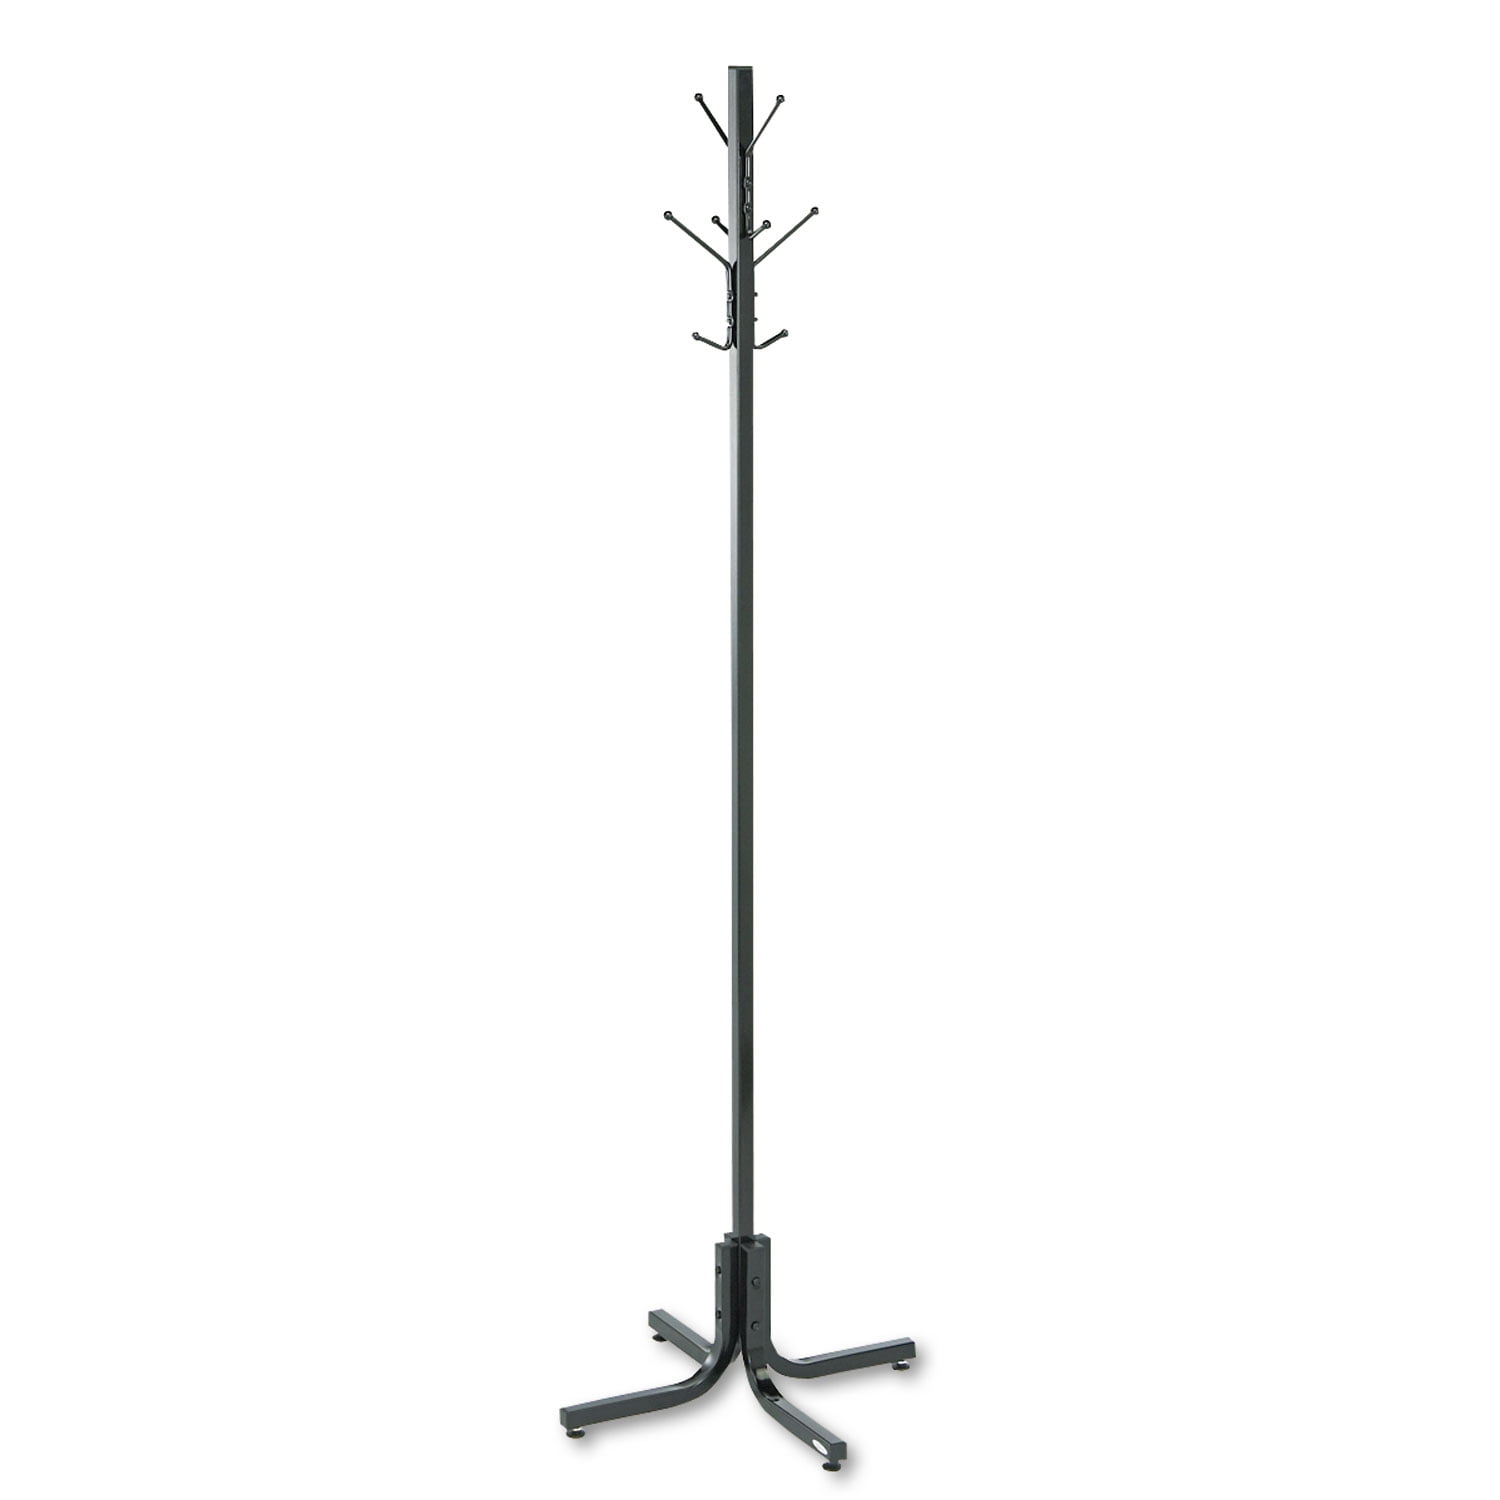 Safco Products Metal Coat Rack with Four Ball-Tipped Double-Hooks 4163BL Black